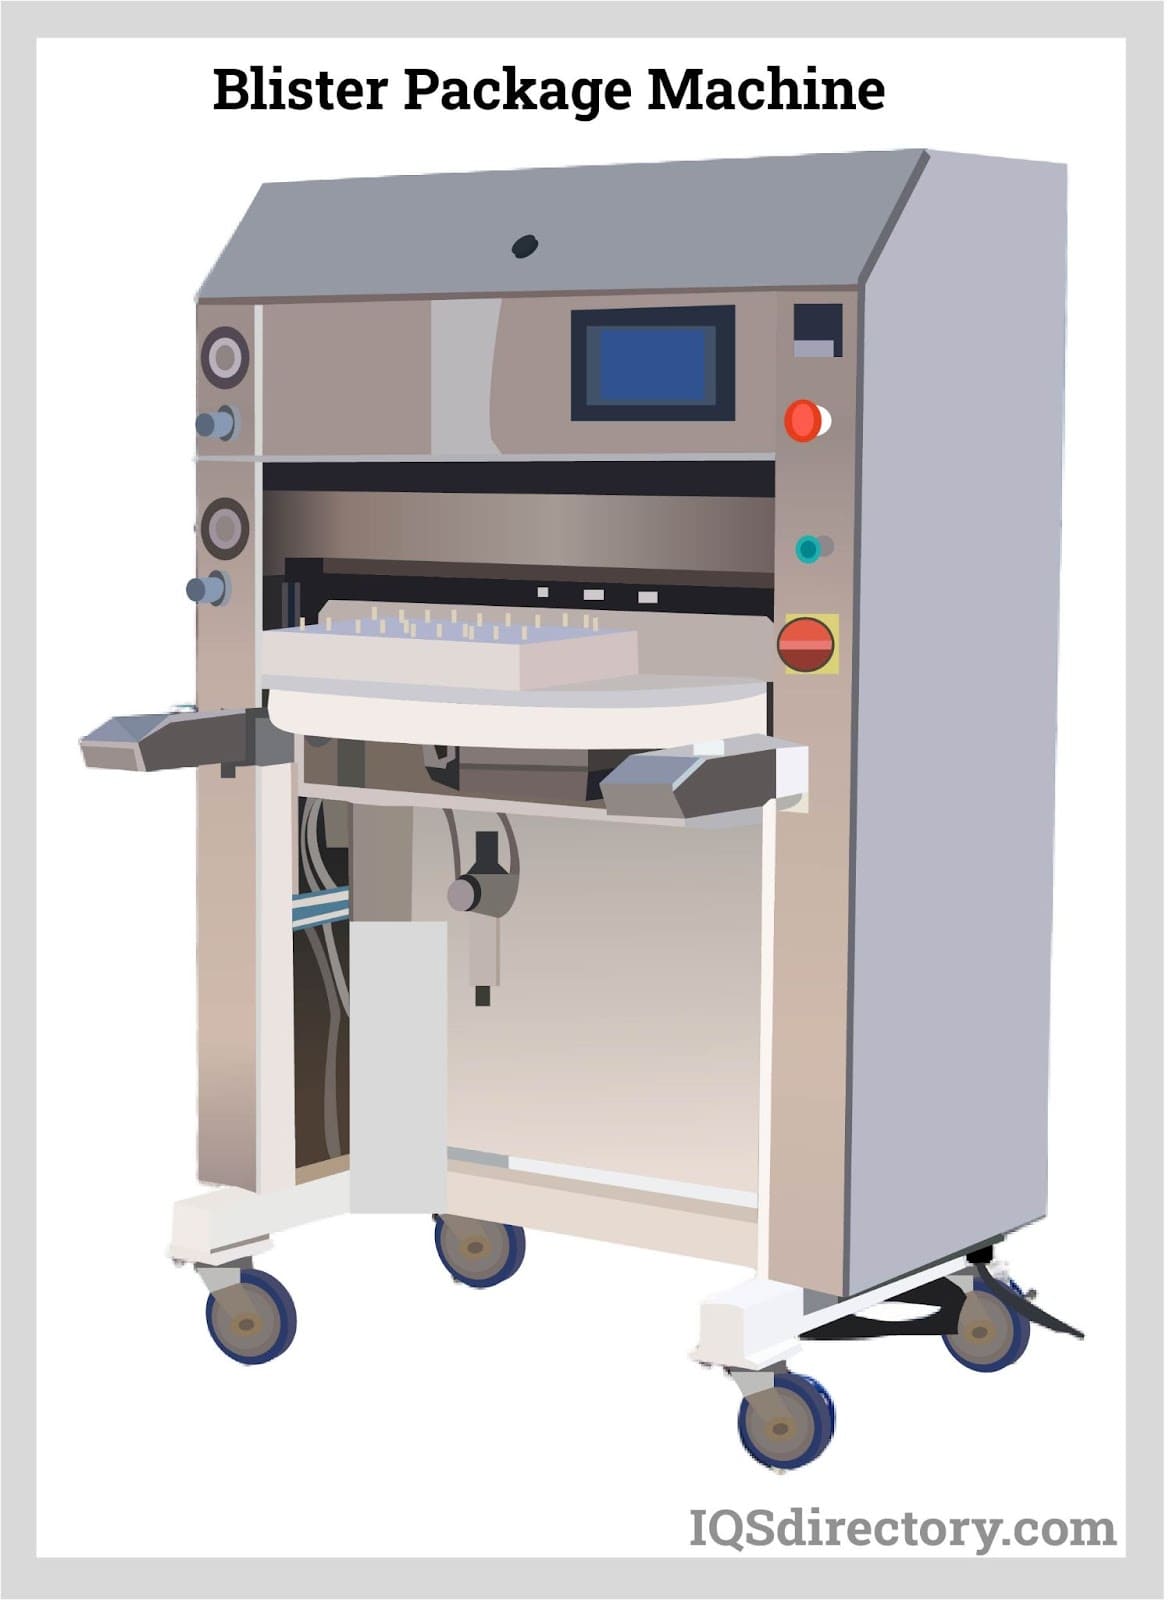 Blister Package Machine